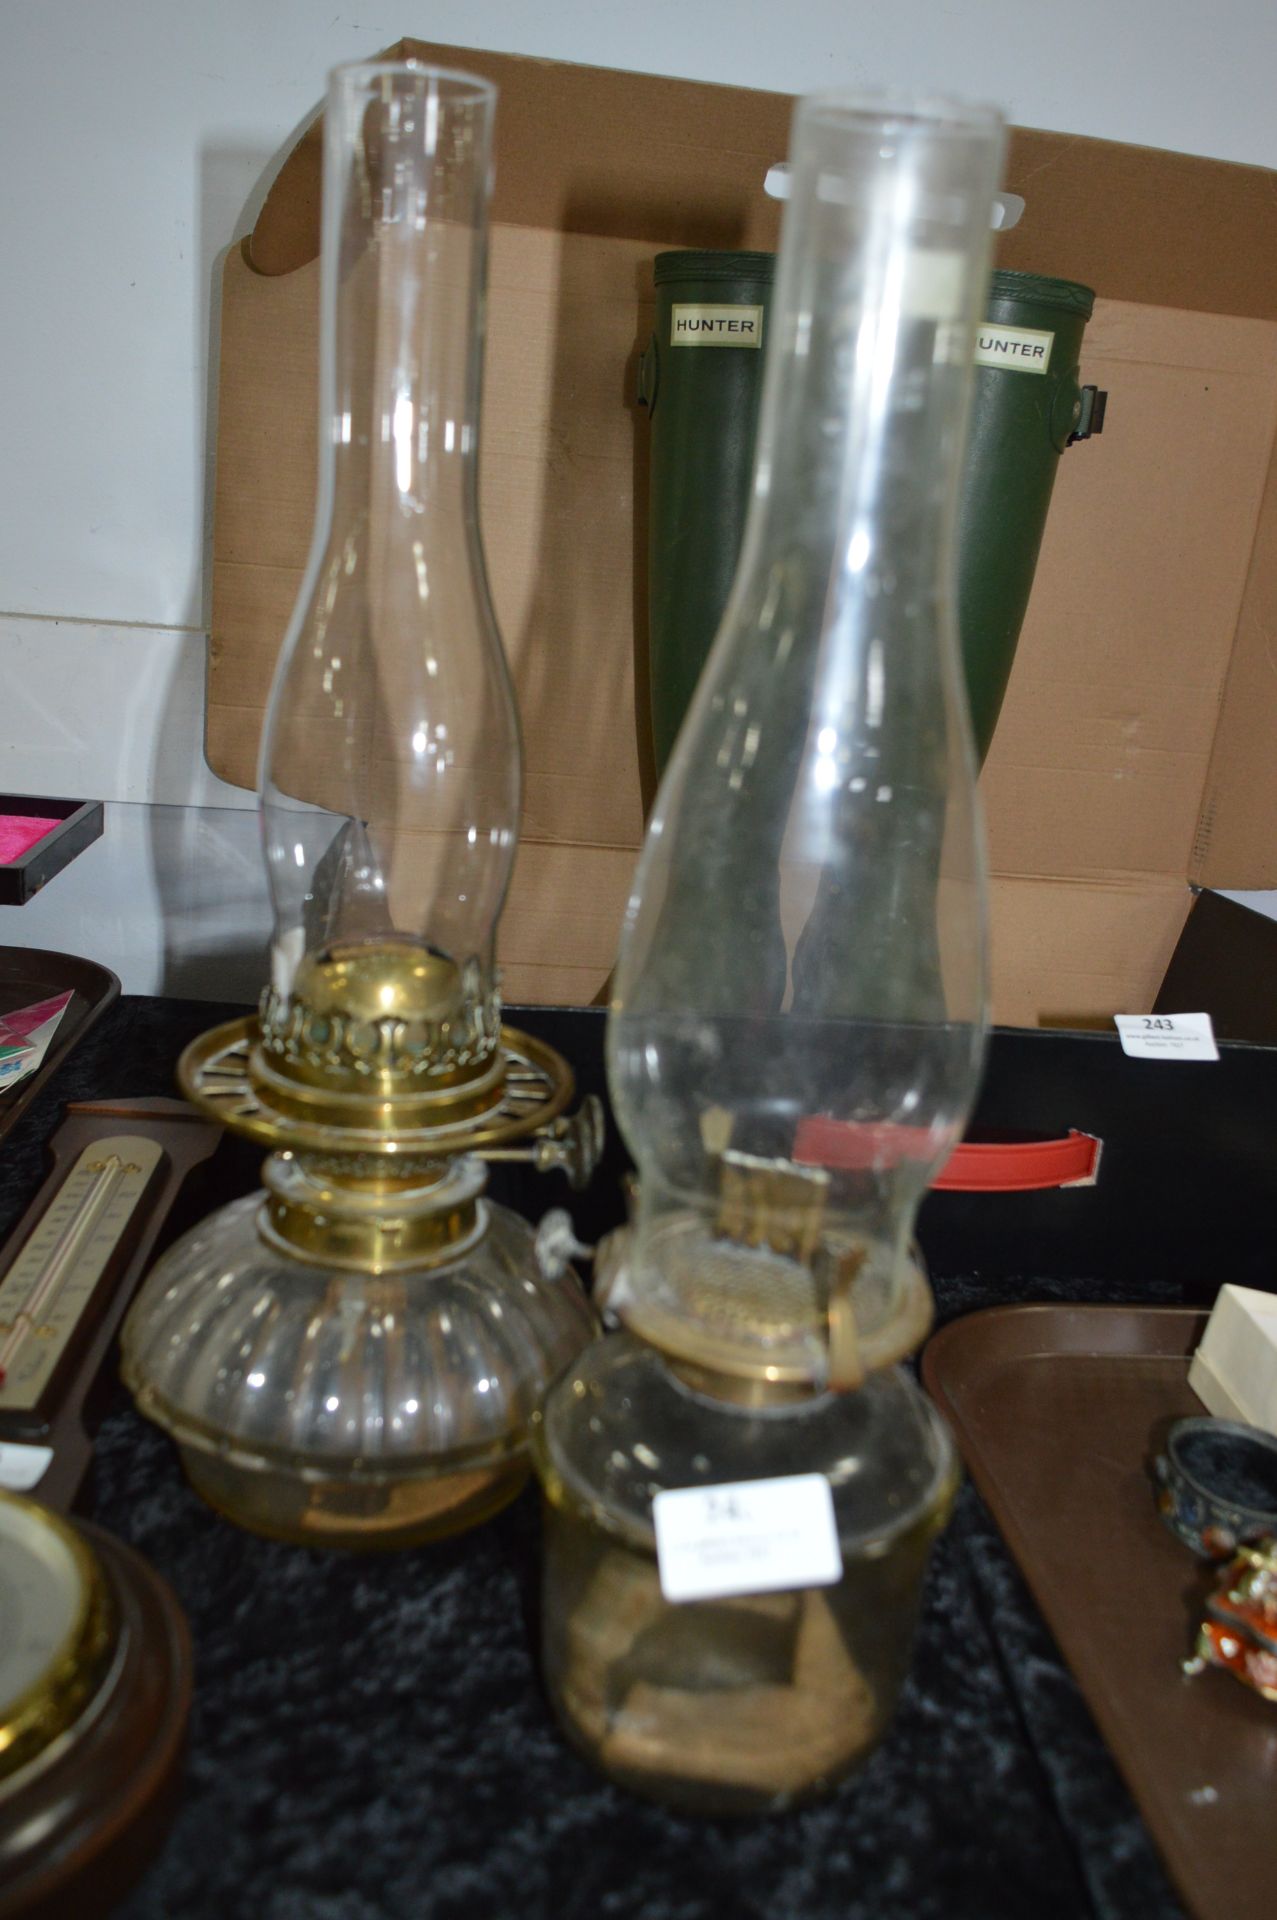 Two Glass Oil Lamps